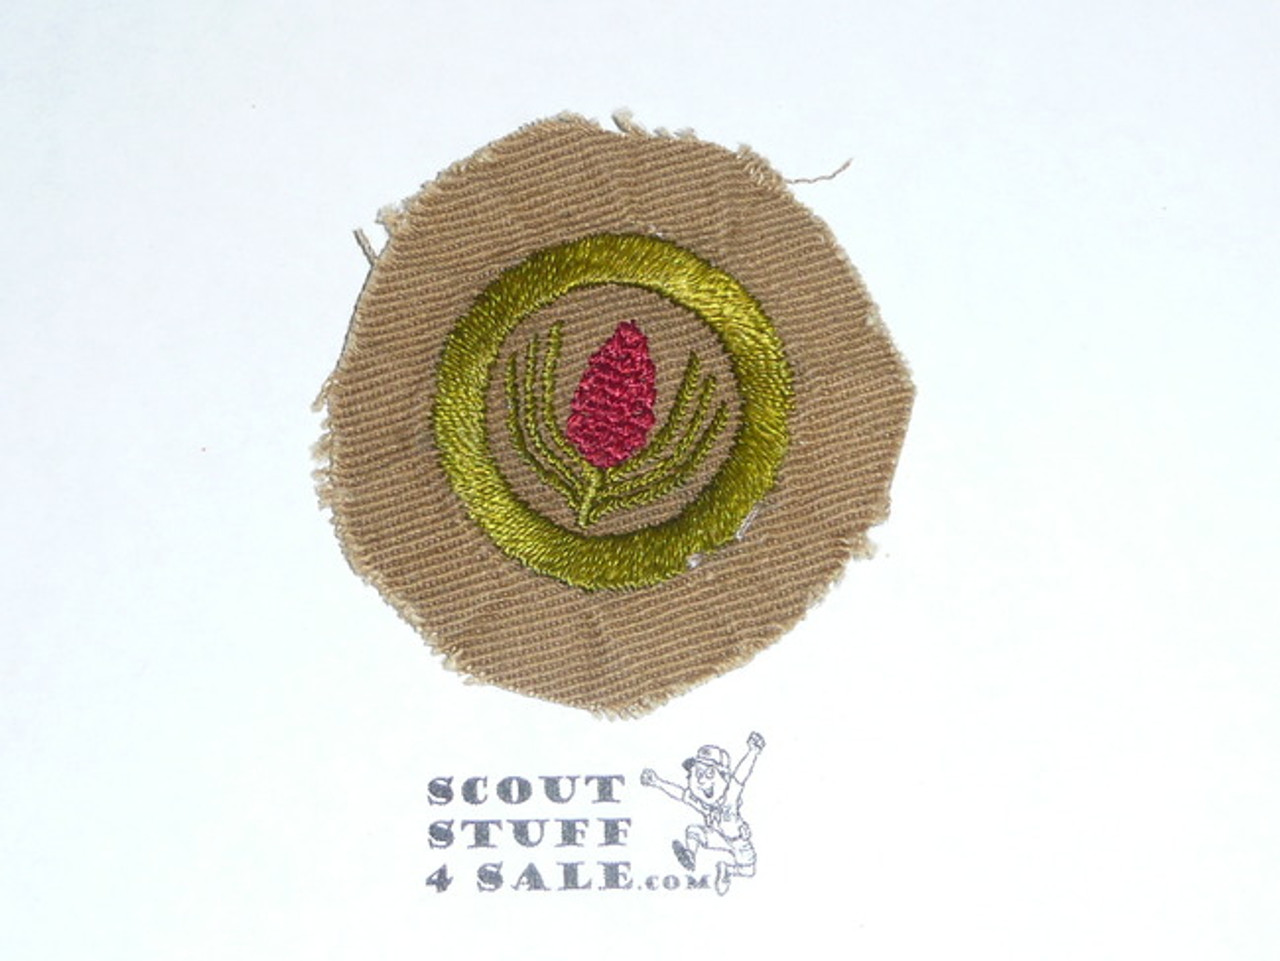 Forestry - Type A - Square Tan Merit Badge (1911-1933), Material trimmed and badge used